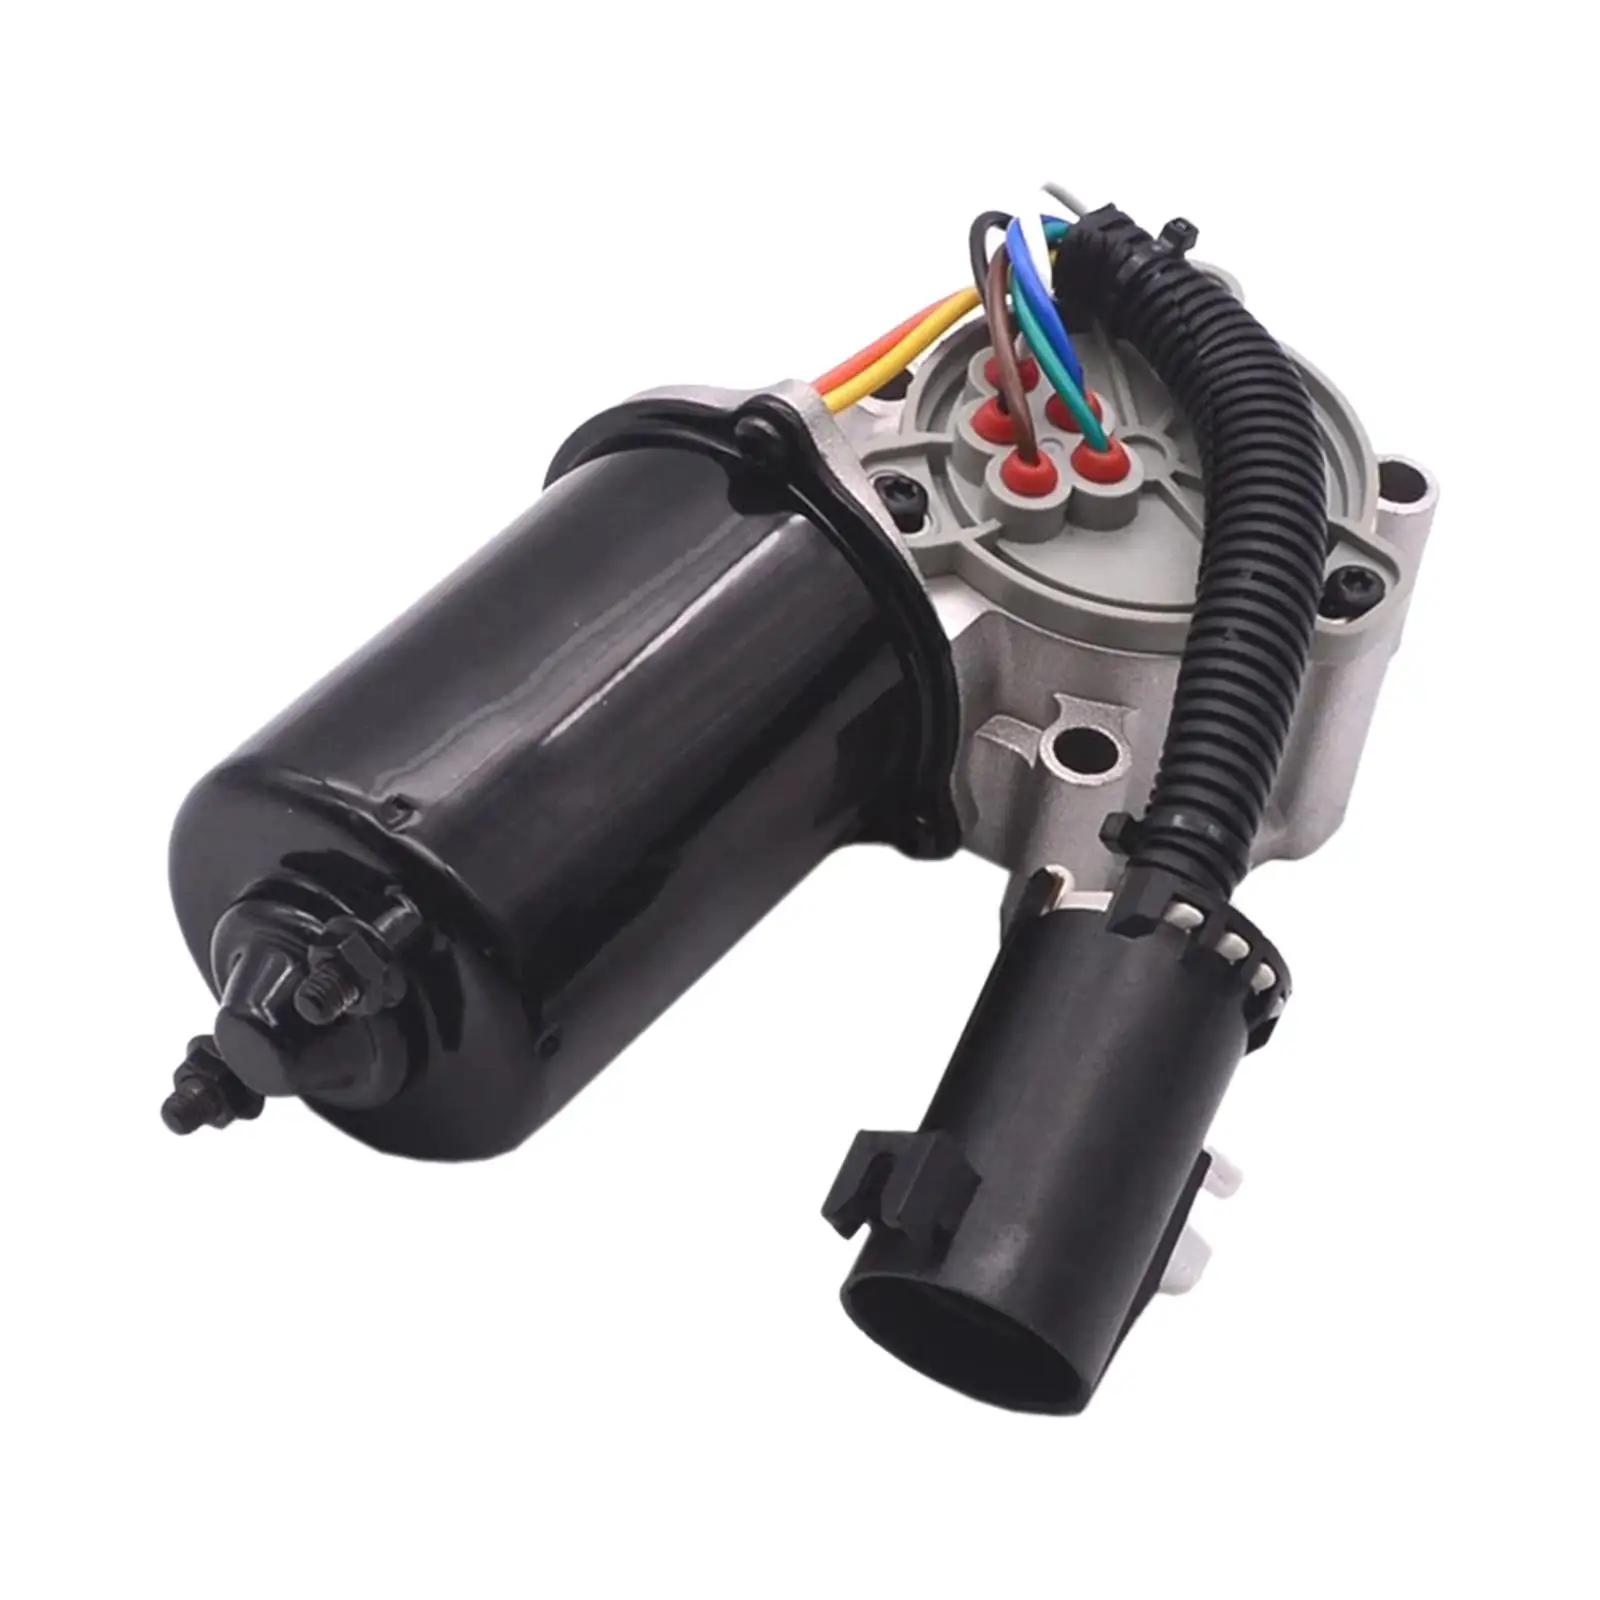 Shift Motor Replaces Spare Parts Durable Car Accessories High Performance 47303-h1010 47303-h1001 for Kia Sorento 2006-2008